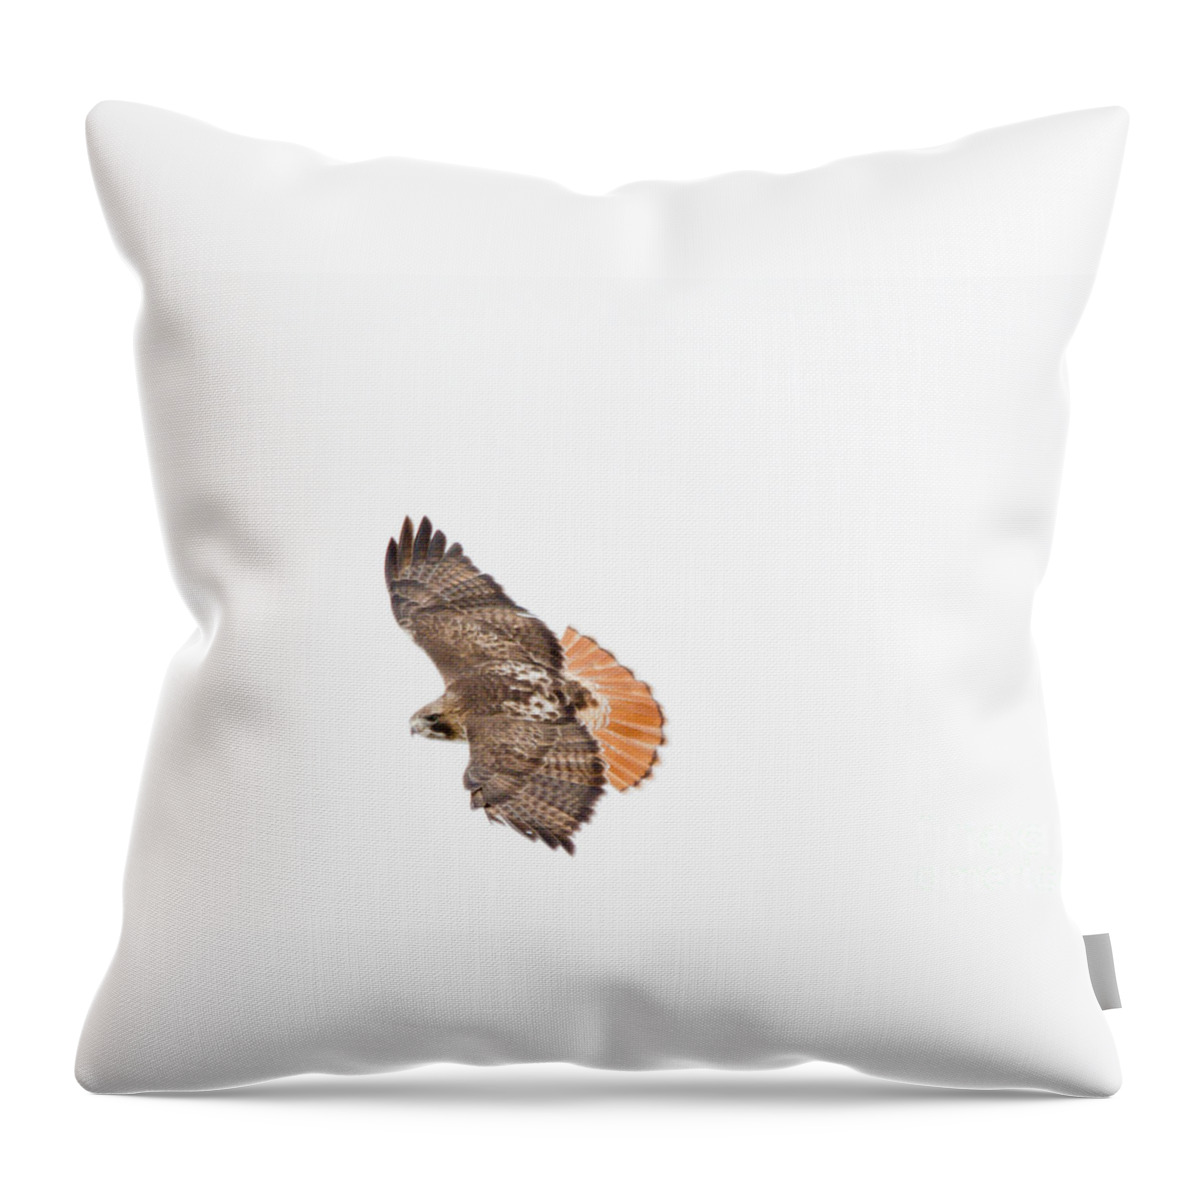 Flight Throw Pillow featuring the photograph Red Tailed Hawk by Cheryl Baxter